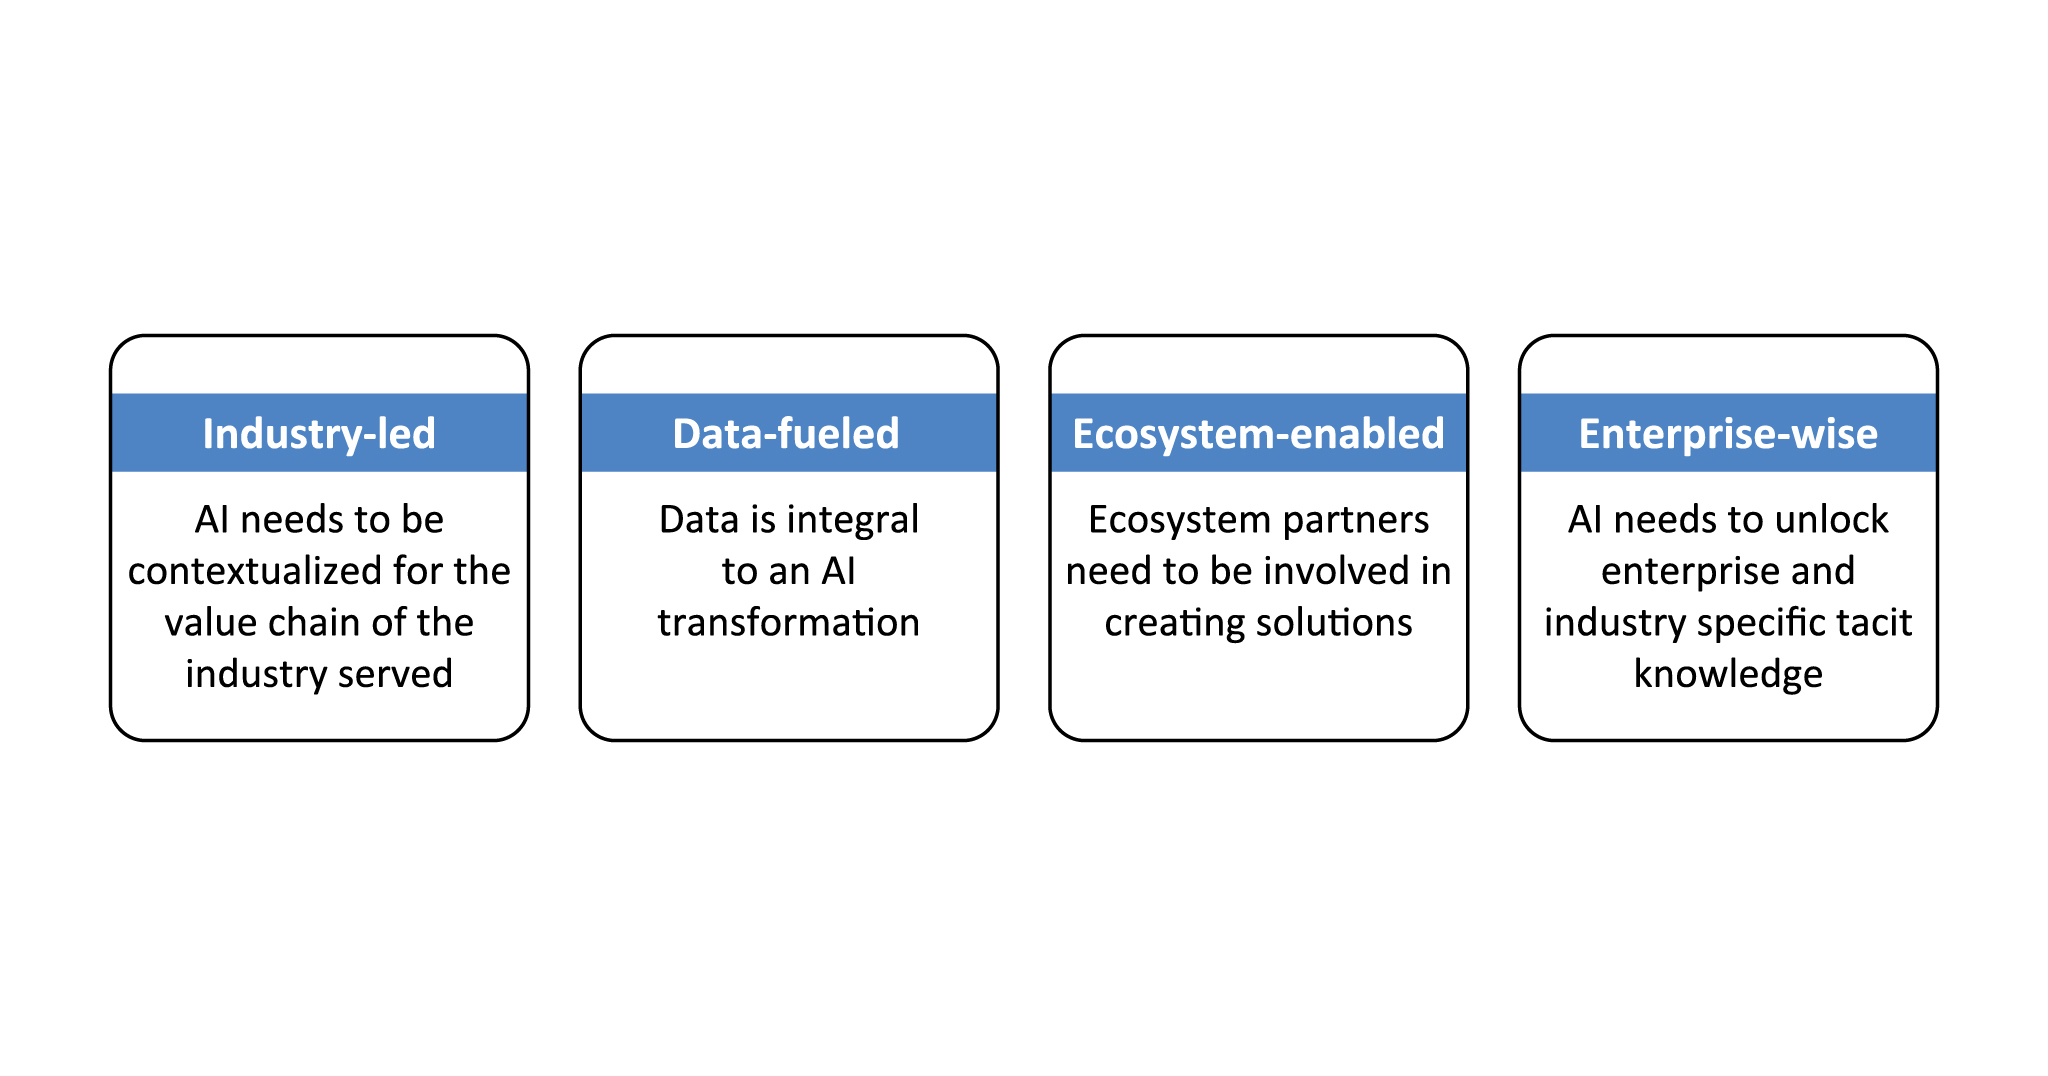 Figure 2 shows the four principles of an AI approach, which includes industry-led, data-fueled and ecosystem-enabled principles, and a culminating fourth principle of an enterprise-wise approach.